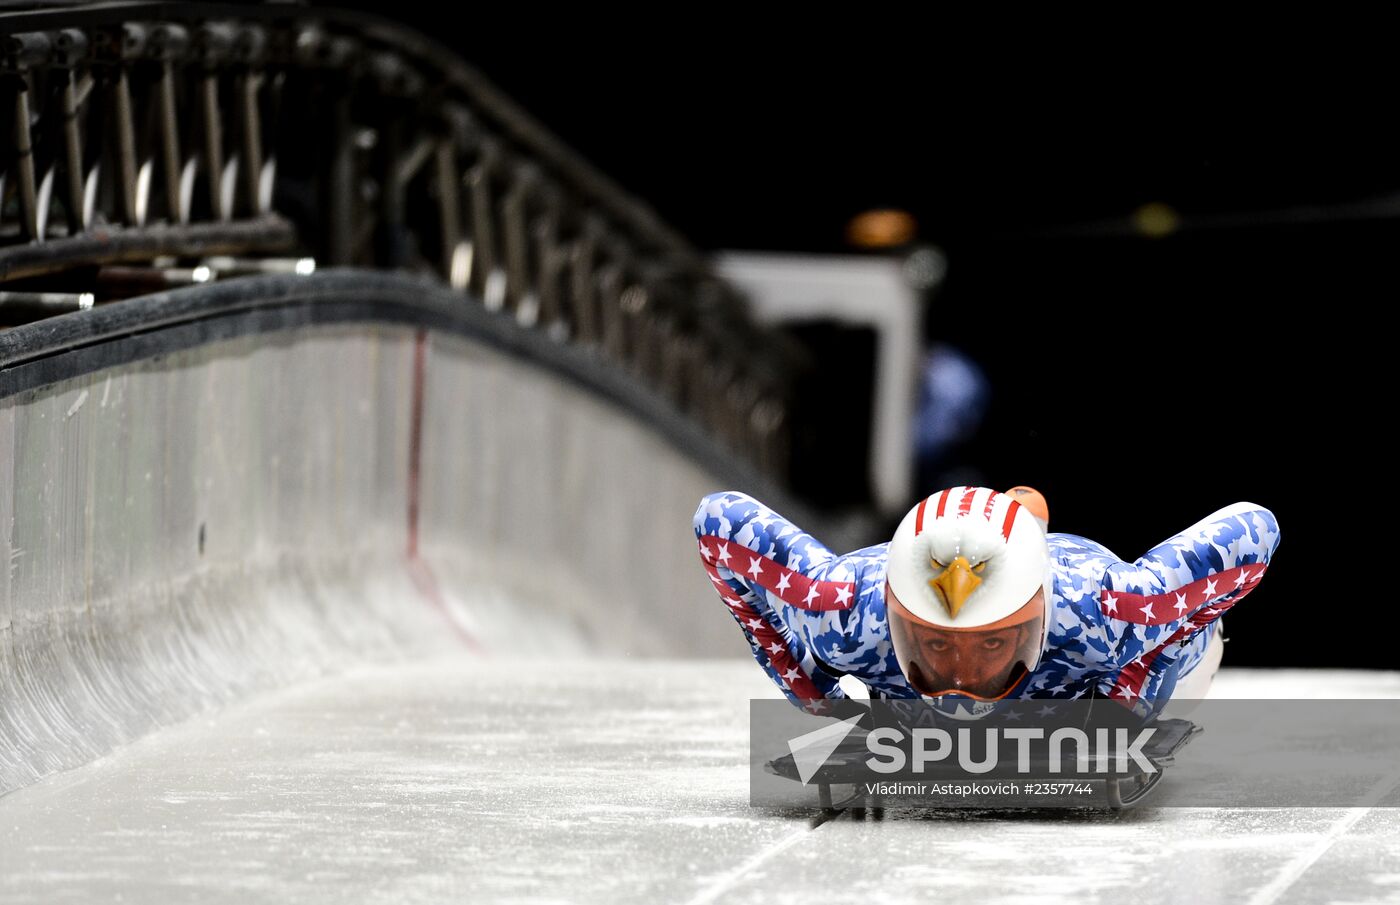 XXII Olympic Winter Games. Skeleton. Training sessions